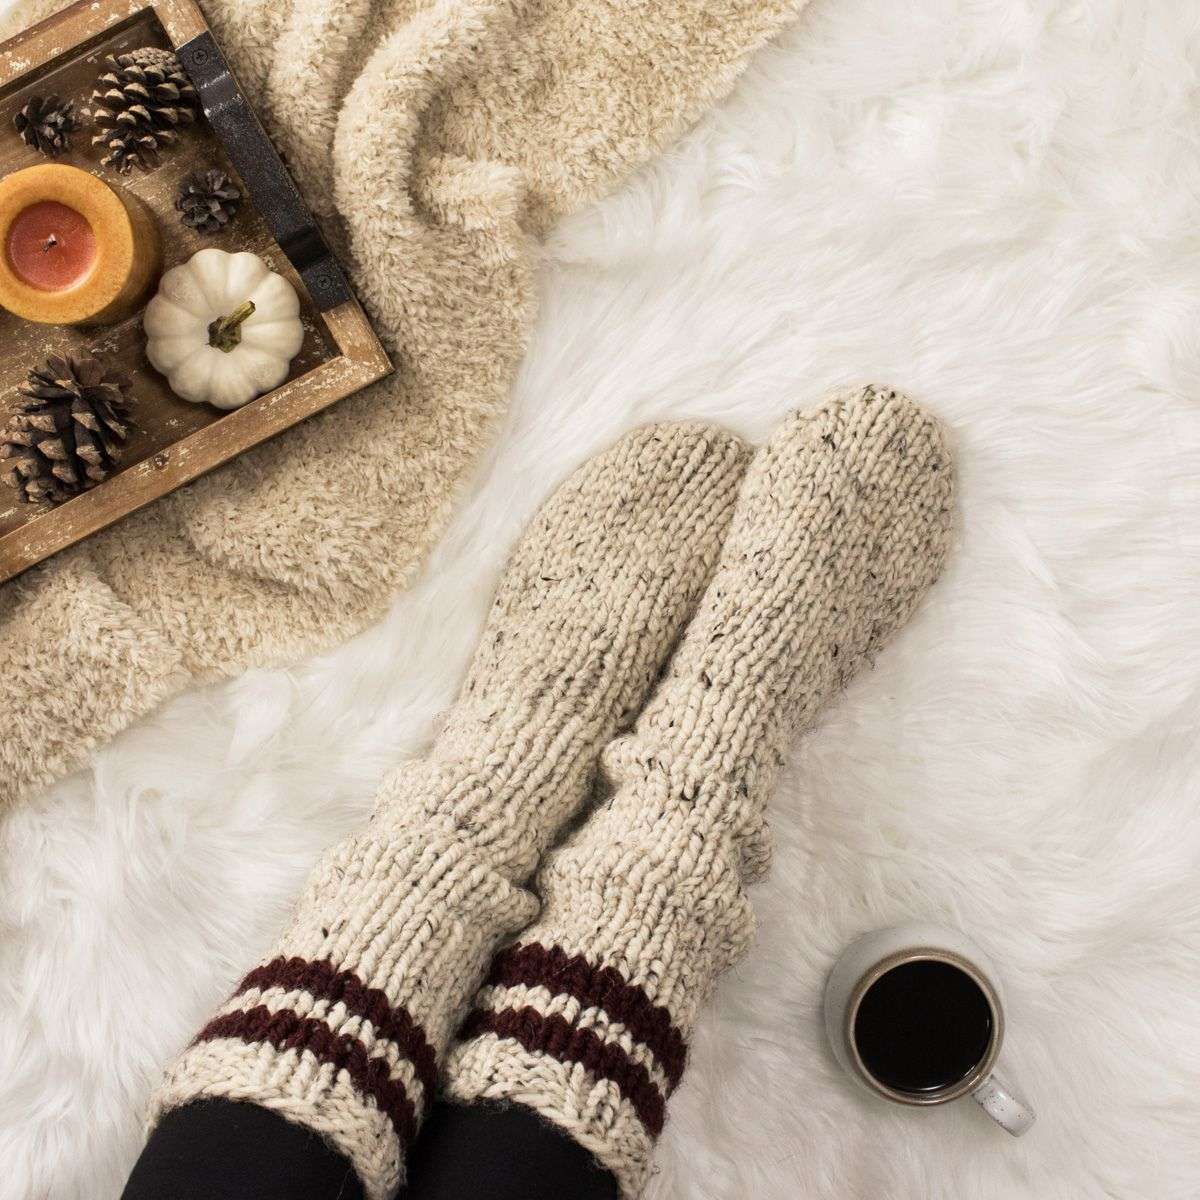 Round Sock Toe, Step-by-Step Knitting Tutorial